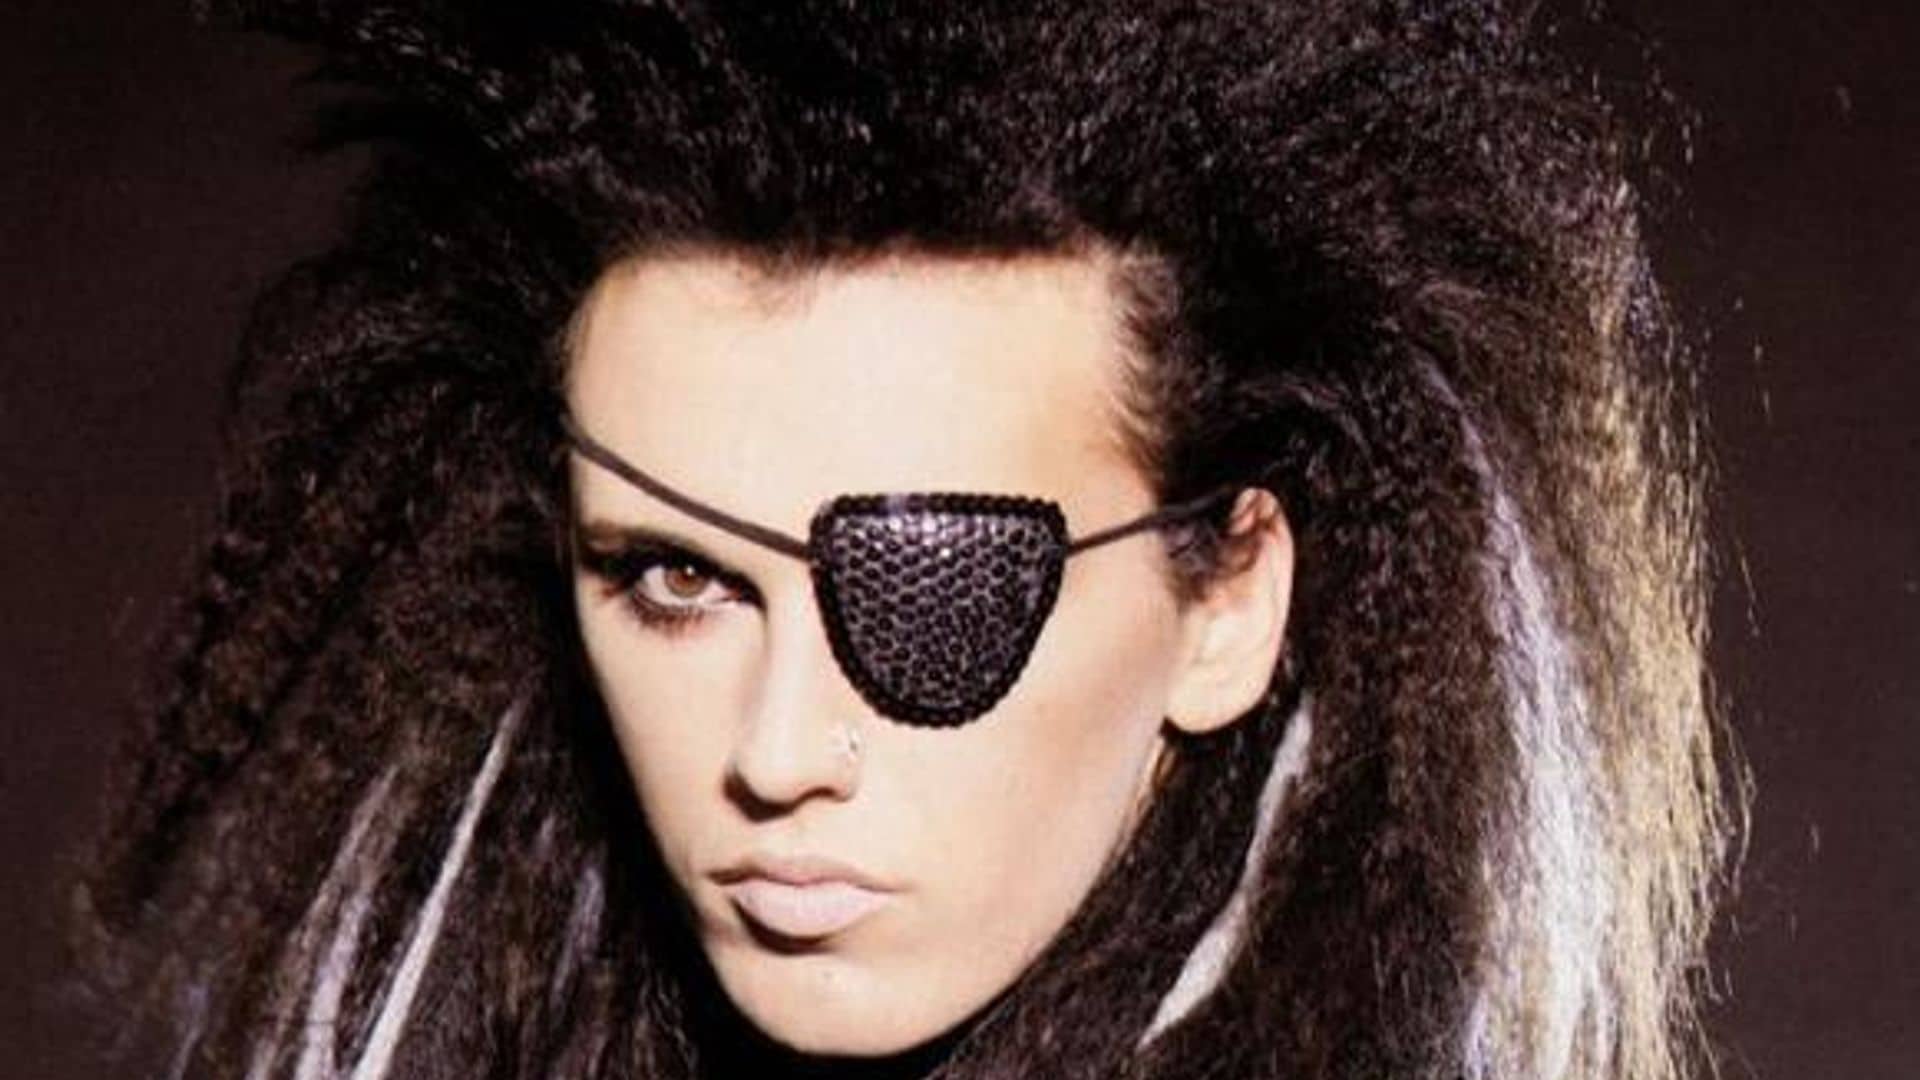 Pete Burns, the controversial singer of the band Dead Or Alive, dies after suffering a cardiac arrest